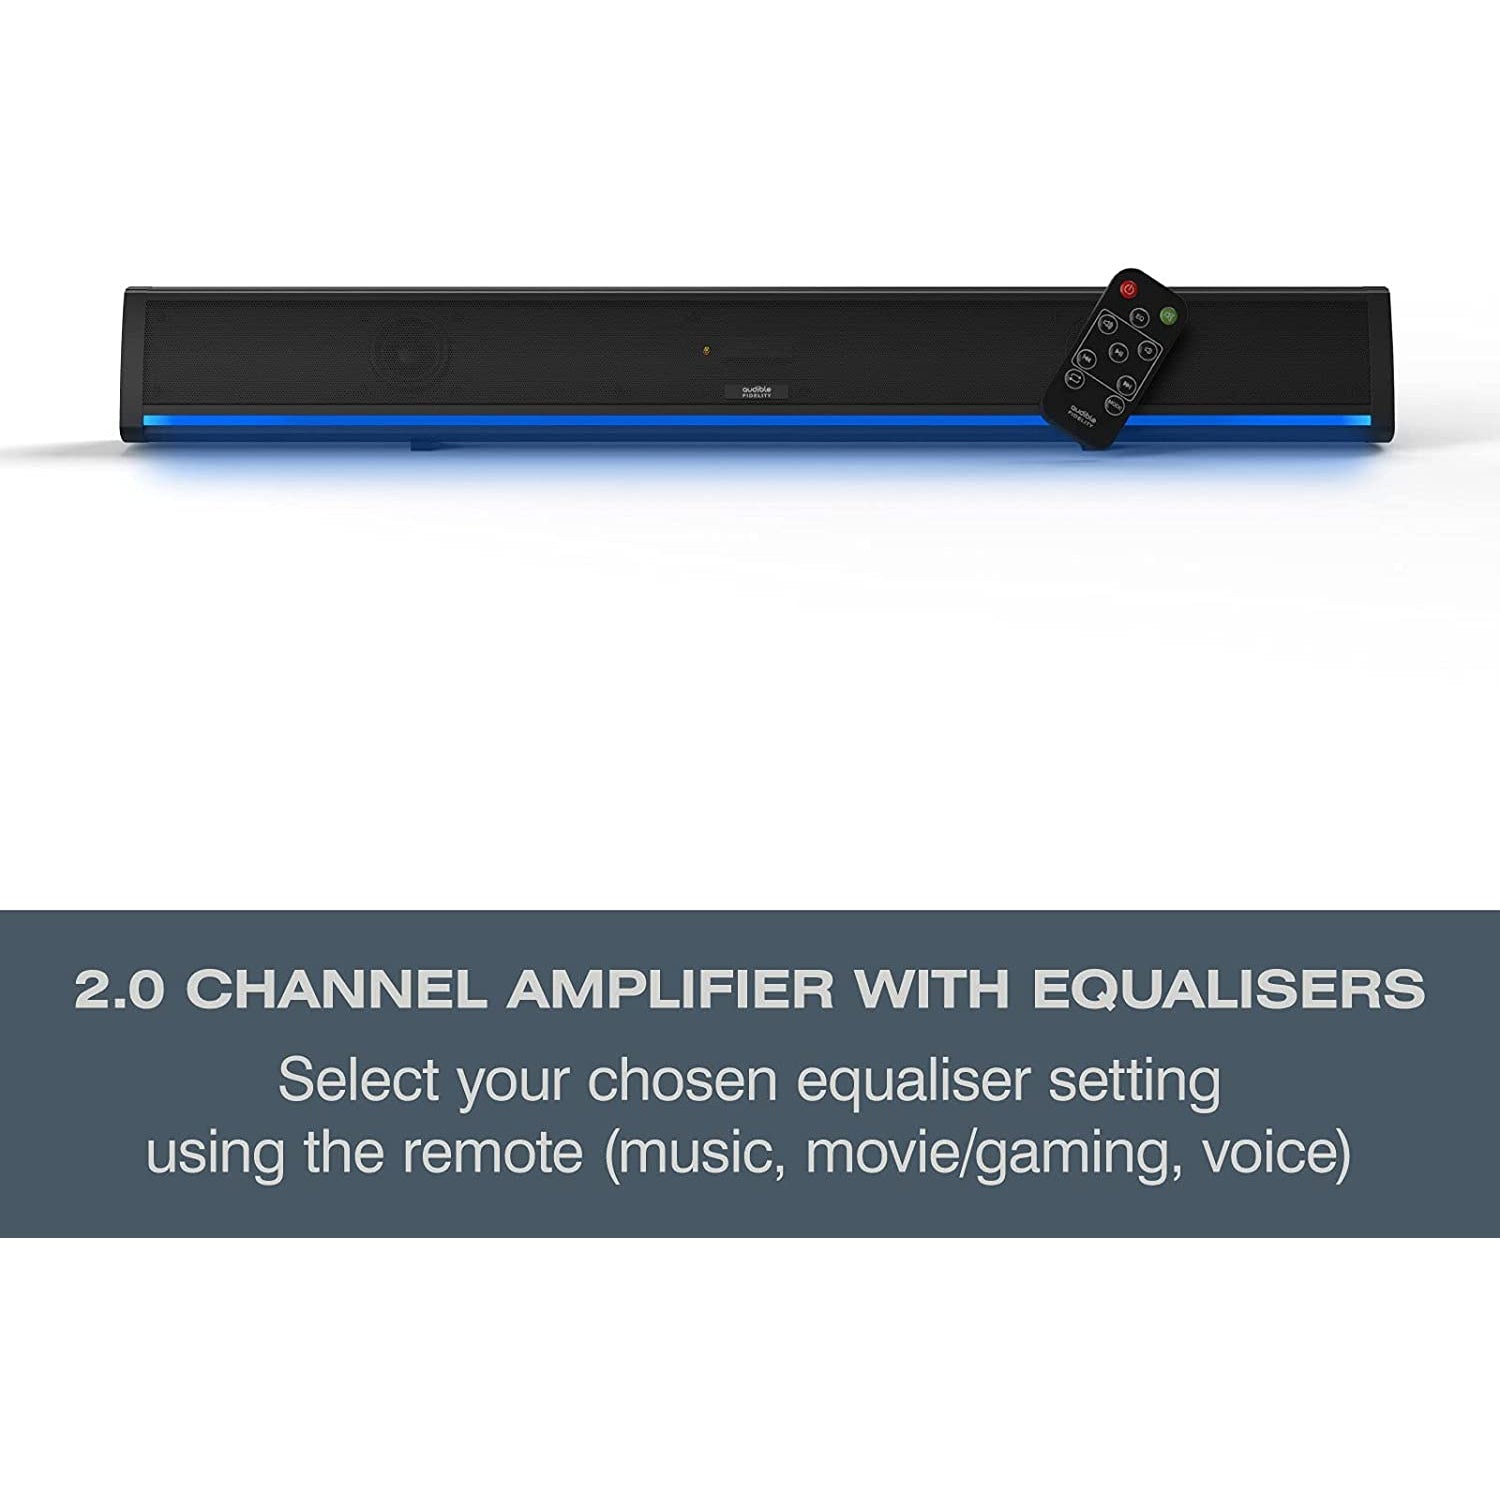 Audible Fidelity Soundbar, Bluetooth Sound Bar for TV and PC, Compact with RGB LED Display, Air Tube & 2.0 Channel Amplifier Wireless